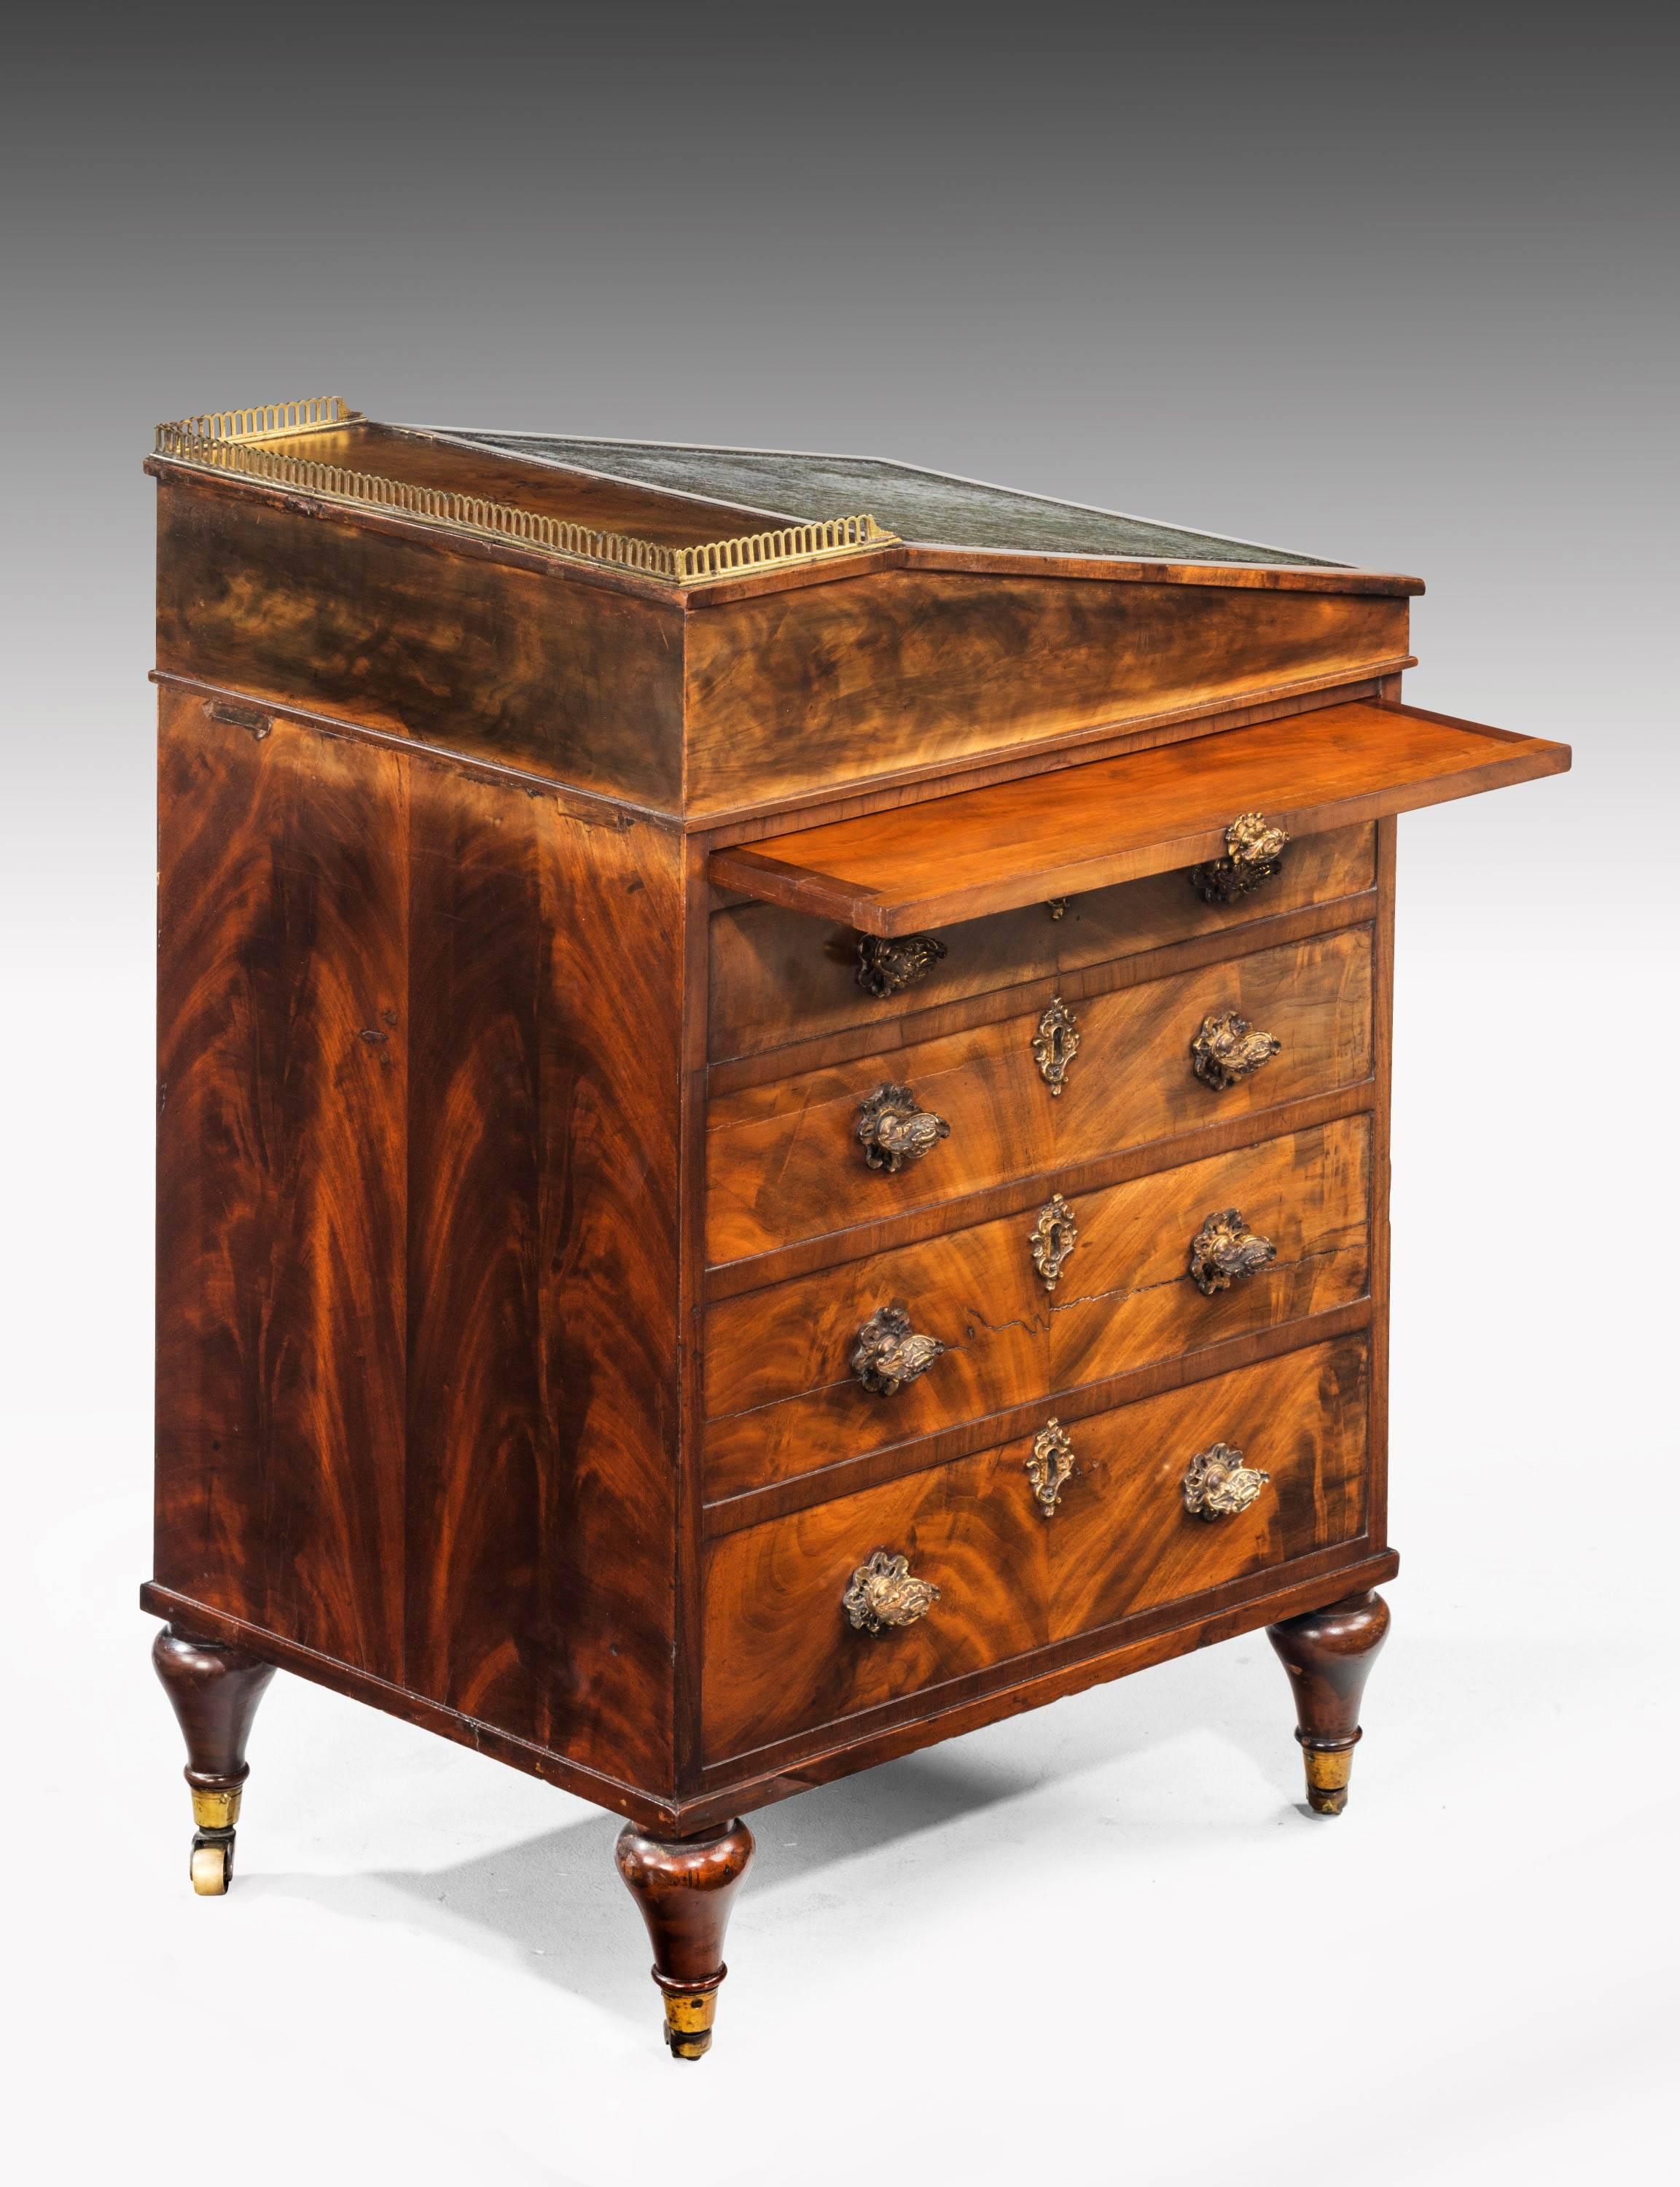 A Regency period mahogany Davenport desk of quite exceptional quality and with beautifully figured timbers. Retaining original calfskin writing surface to the top which is now somewhat worn. Extraordinary fine gilt bronze escutcheons and